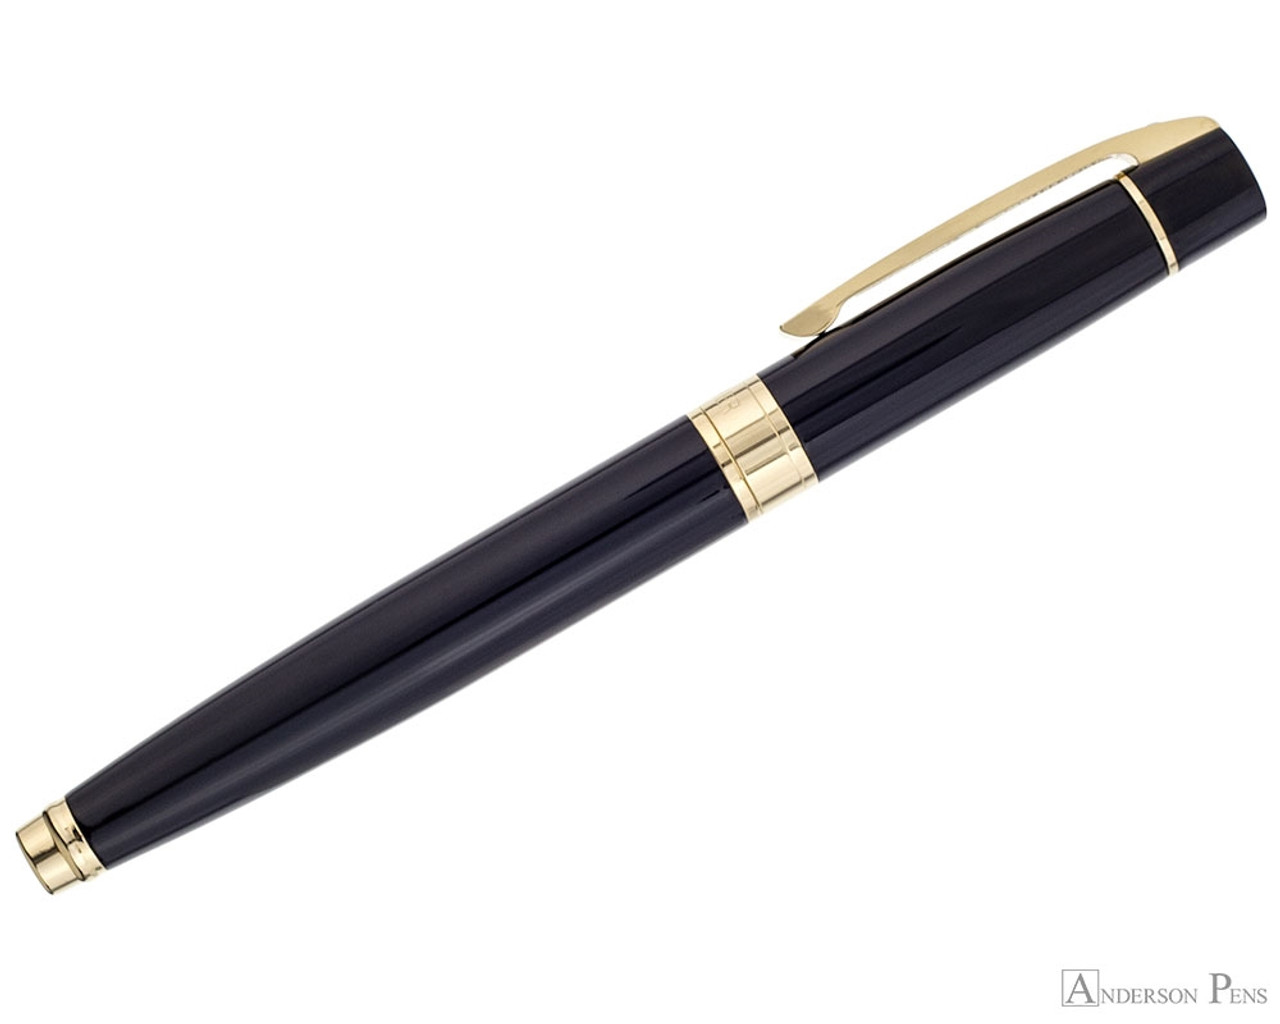 Sheaffer 300 Fountain Pen - Black with Gold Trim